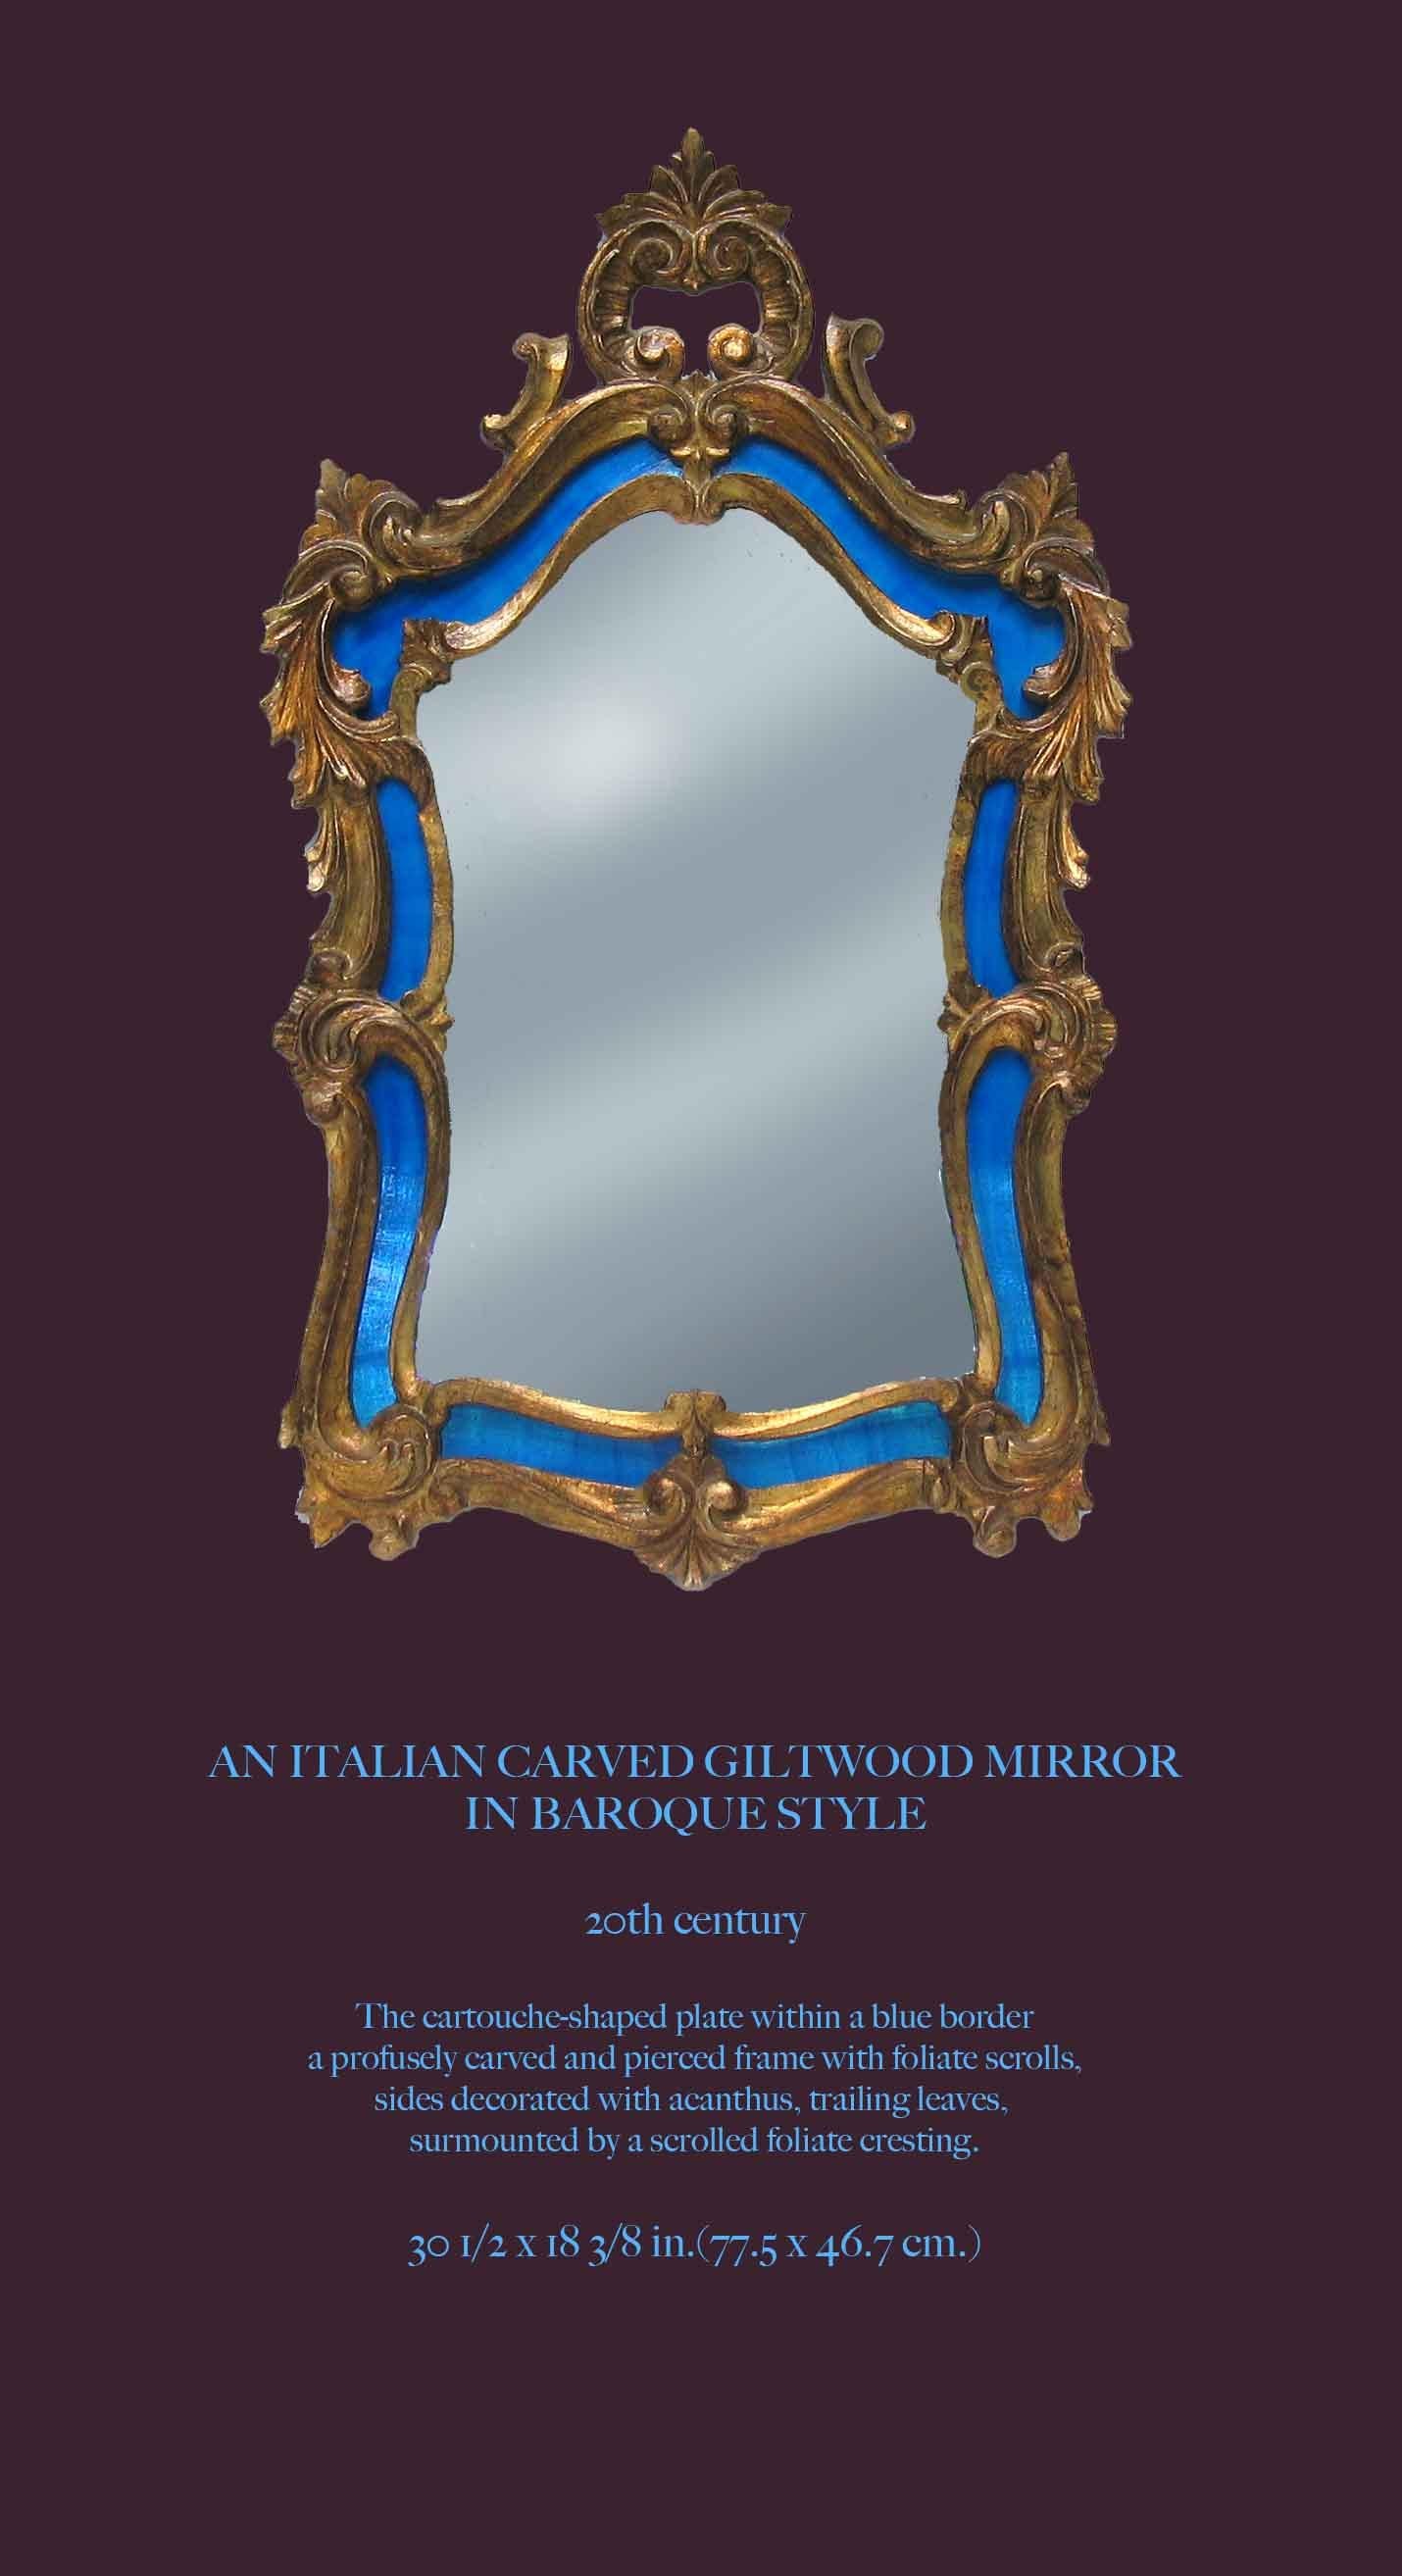 AN ITALIAN CARVED GILTWOOD MIRROR
IN BAROQUE STYLE

20th Century.

The cartouche-shaped plate within a blue border and profusely carved and pierced frame with foliate scrolls,
sides decorated with acanthus, trailing leaves,
surmounted by a scrolled